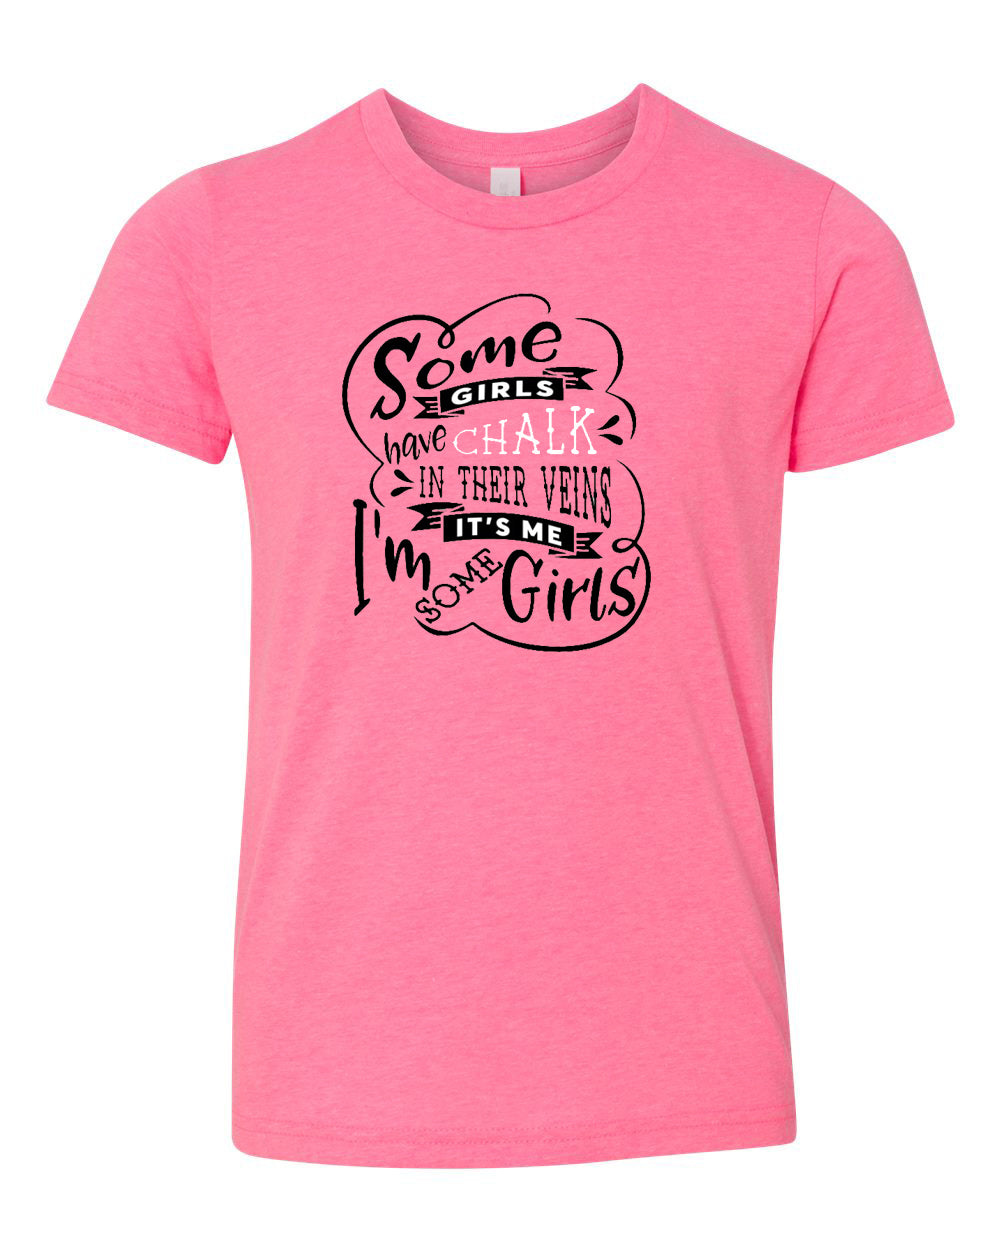 Some Girls Have Chalk In Their Veins Youth Neon T-Shirt Pink